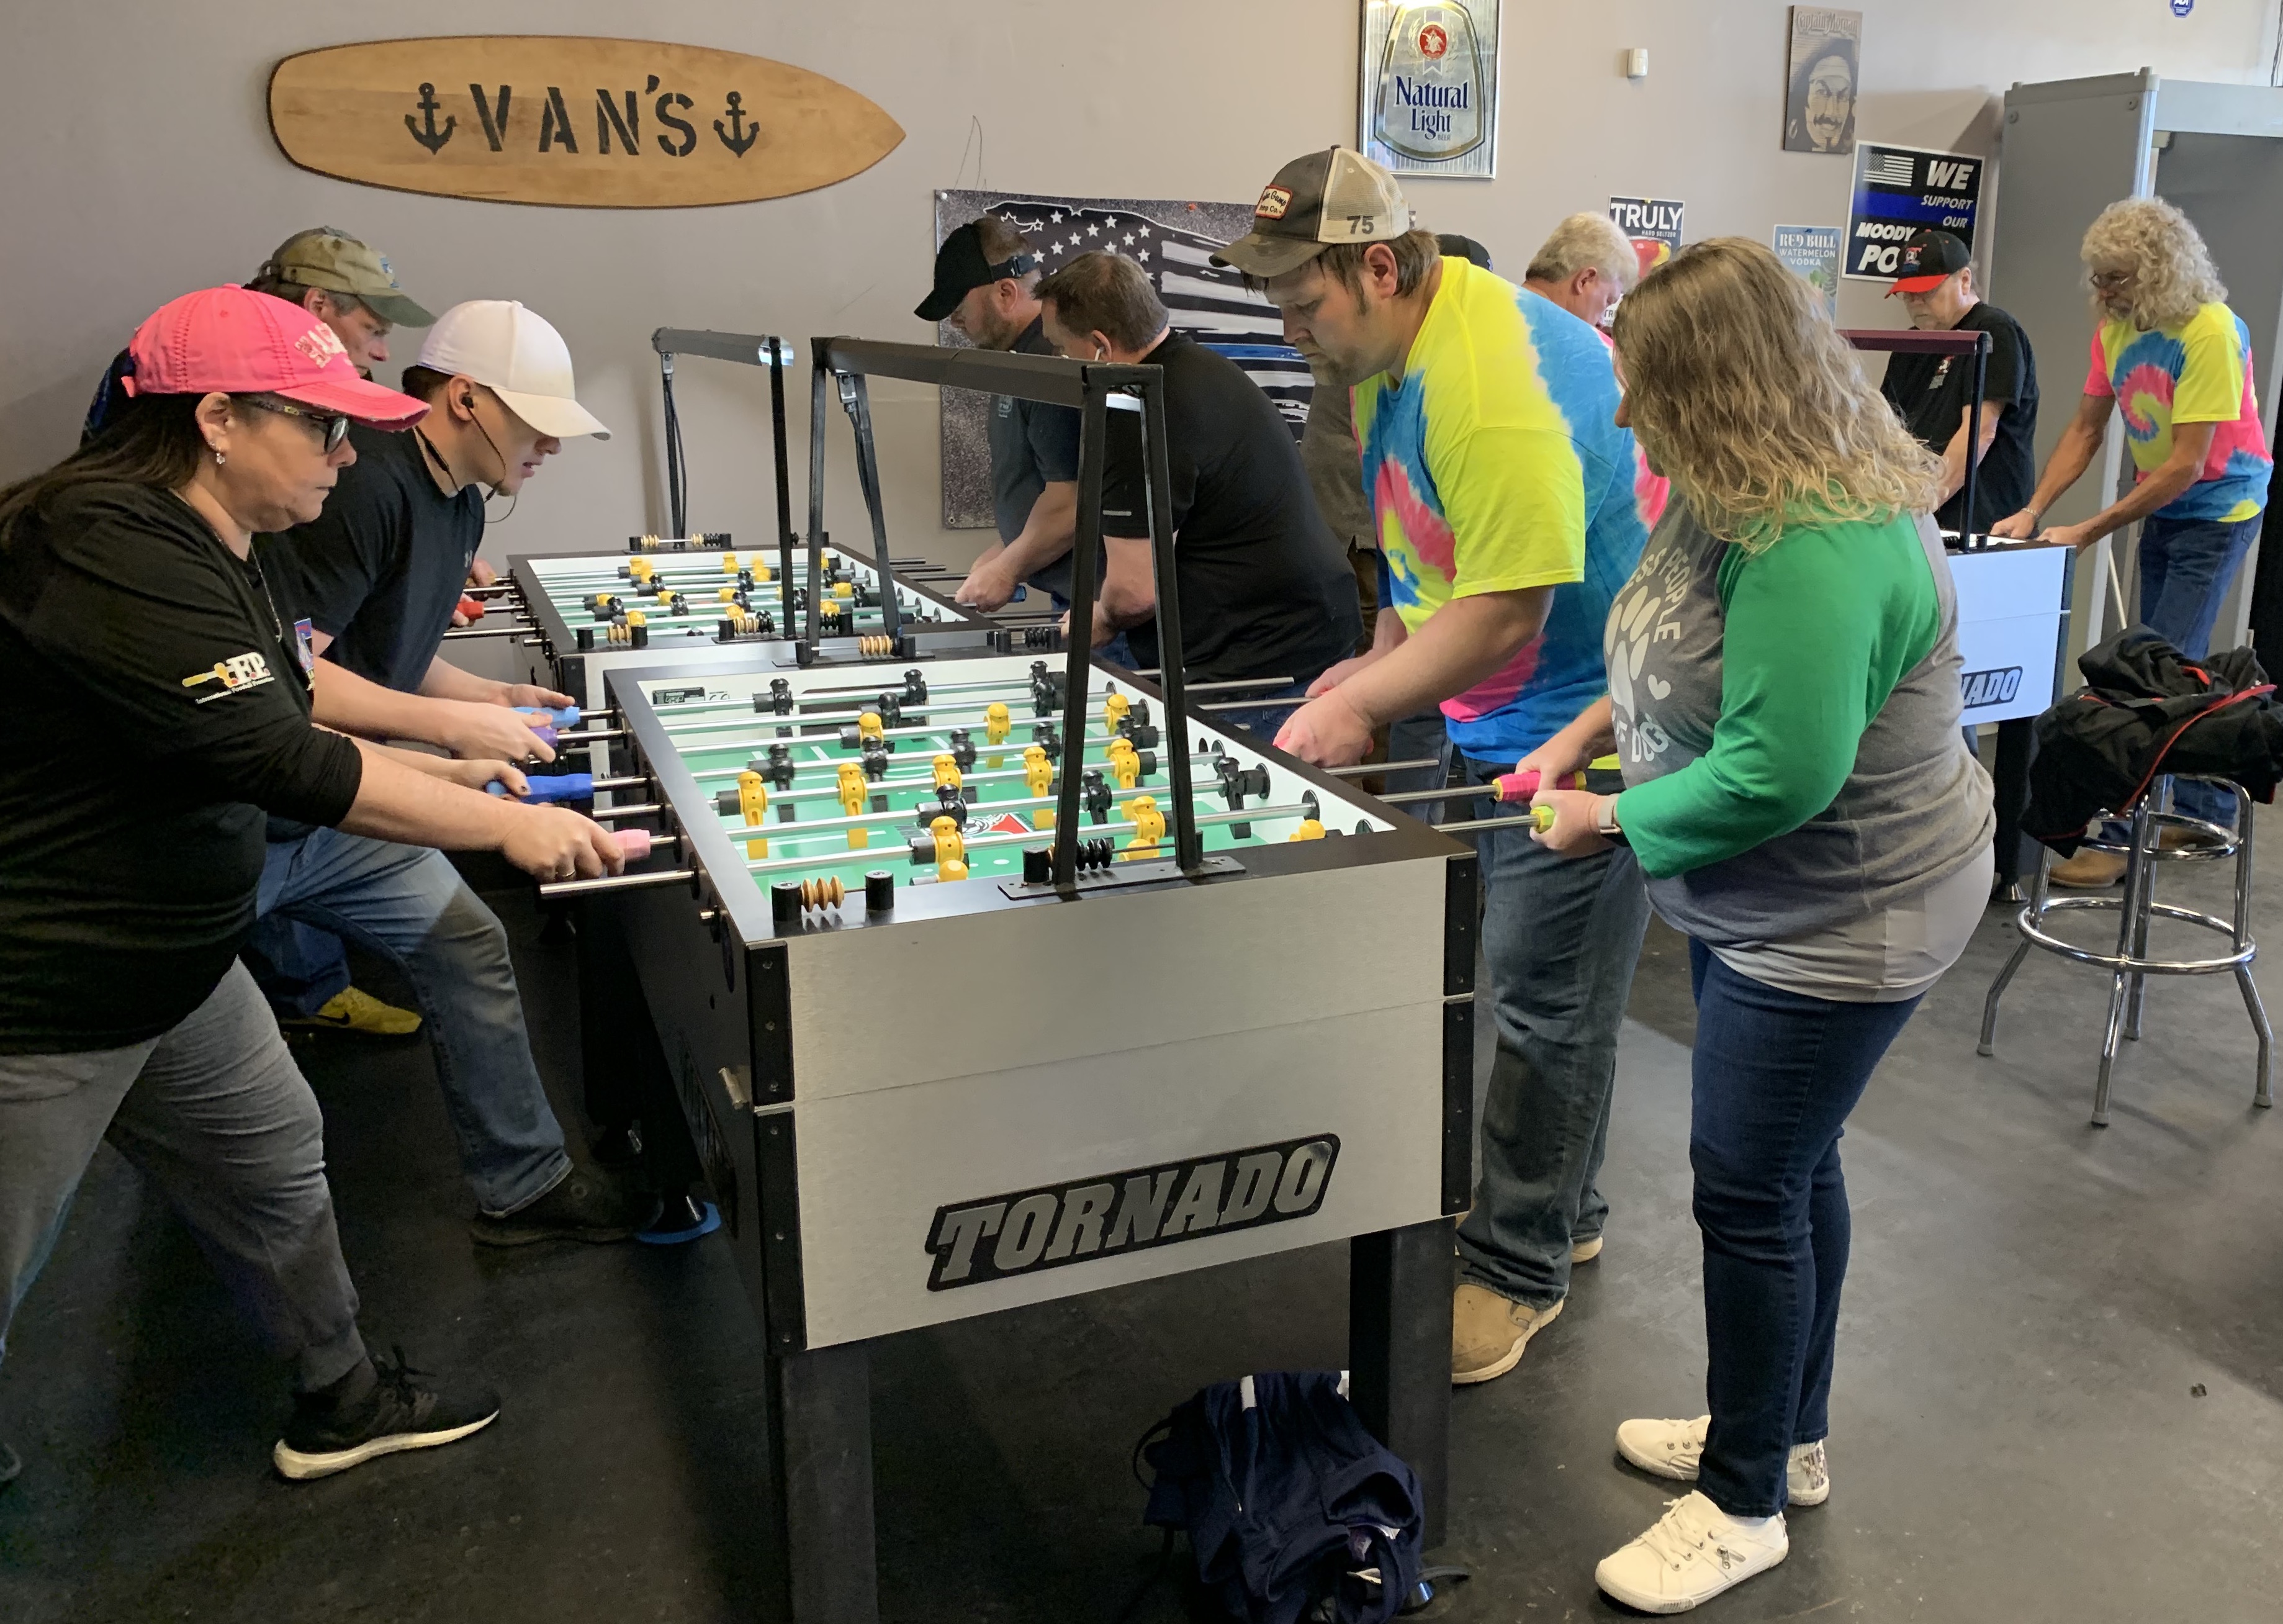 Let's play some foosball, shown is tournament action in Leeds,AL. March 12, 2022.